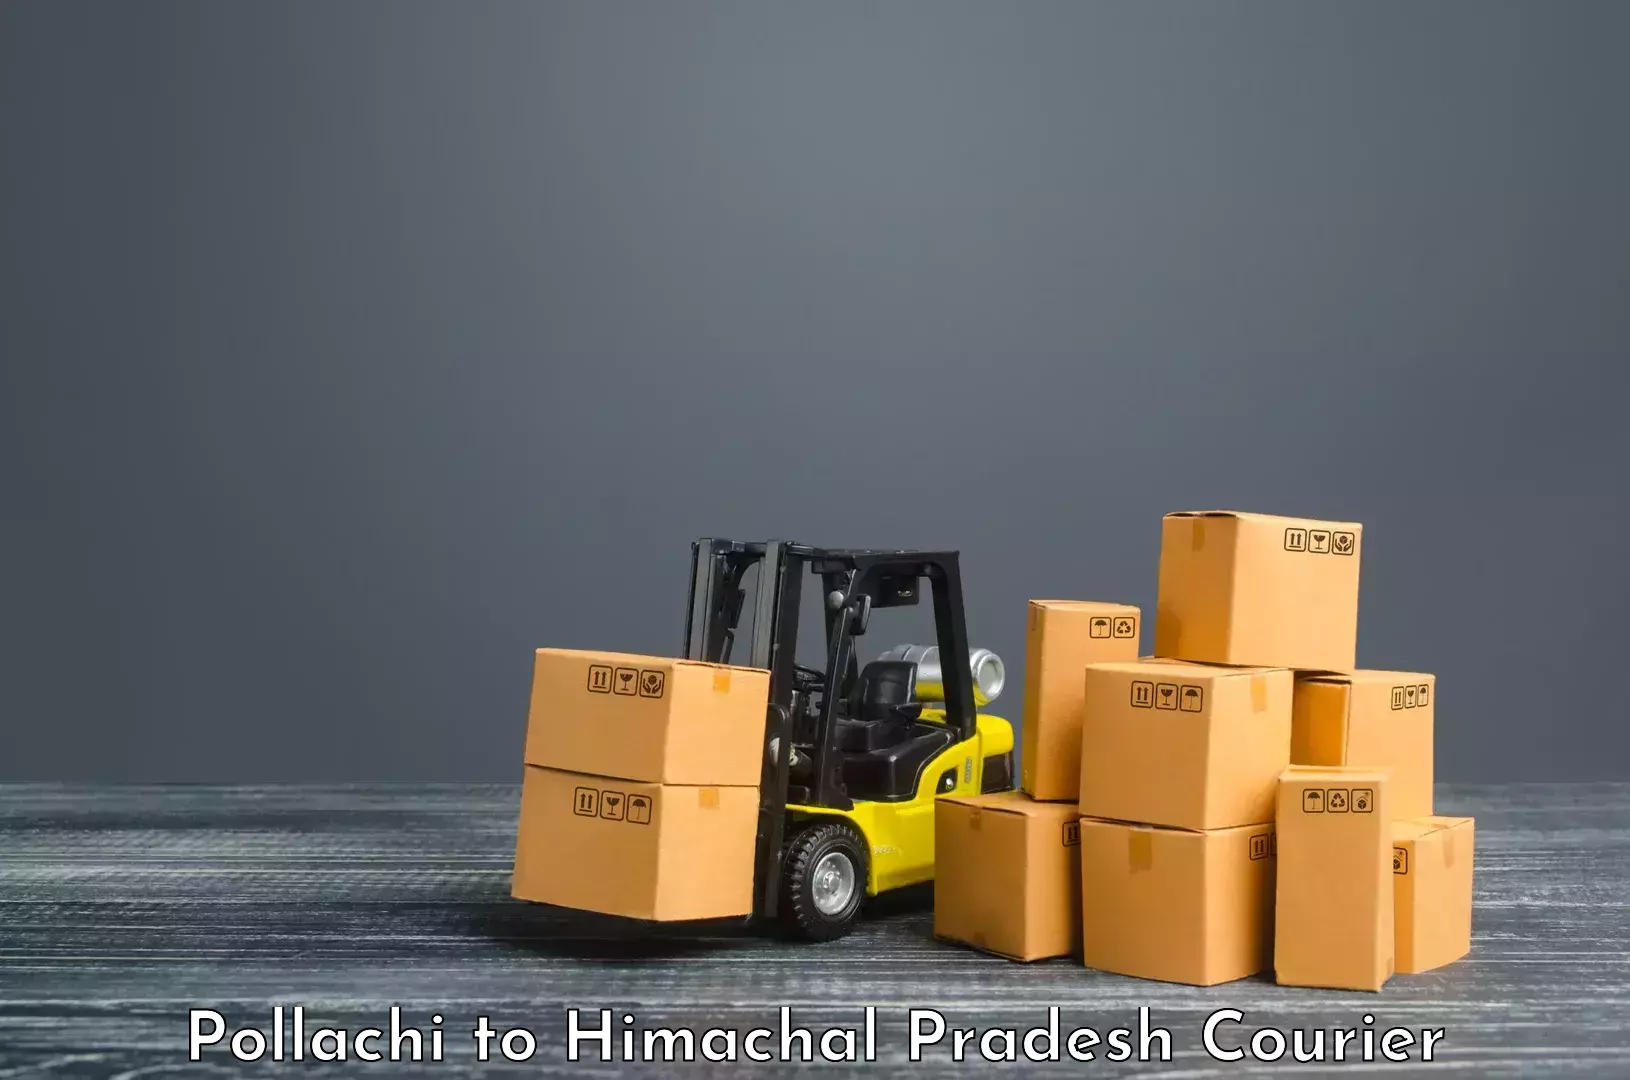 High-speed parcel service Pollachi to Kandaghat